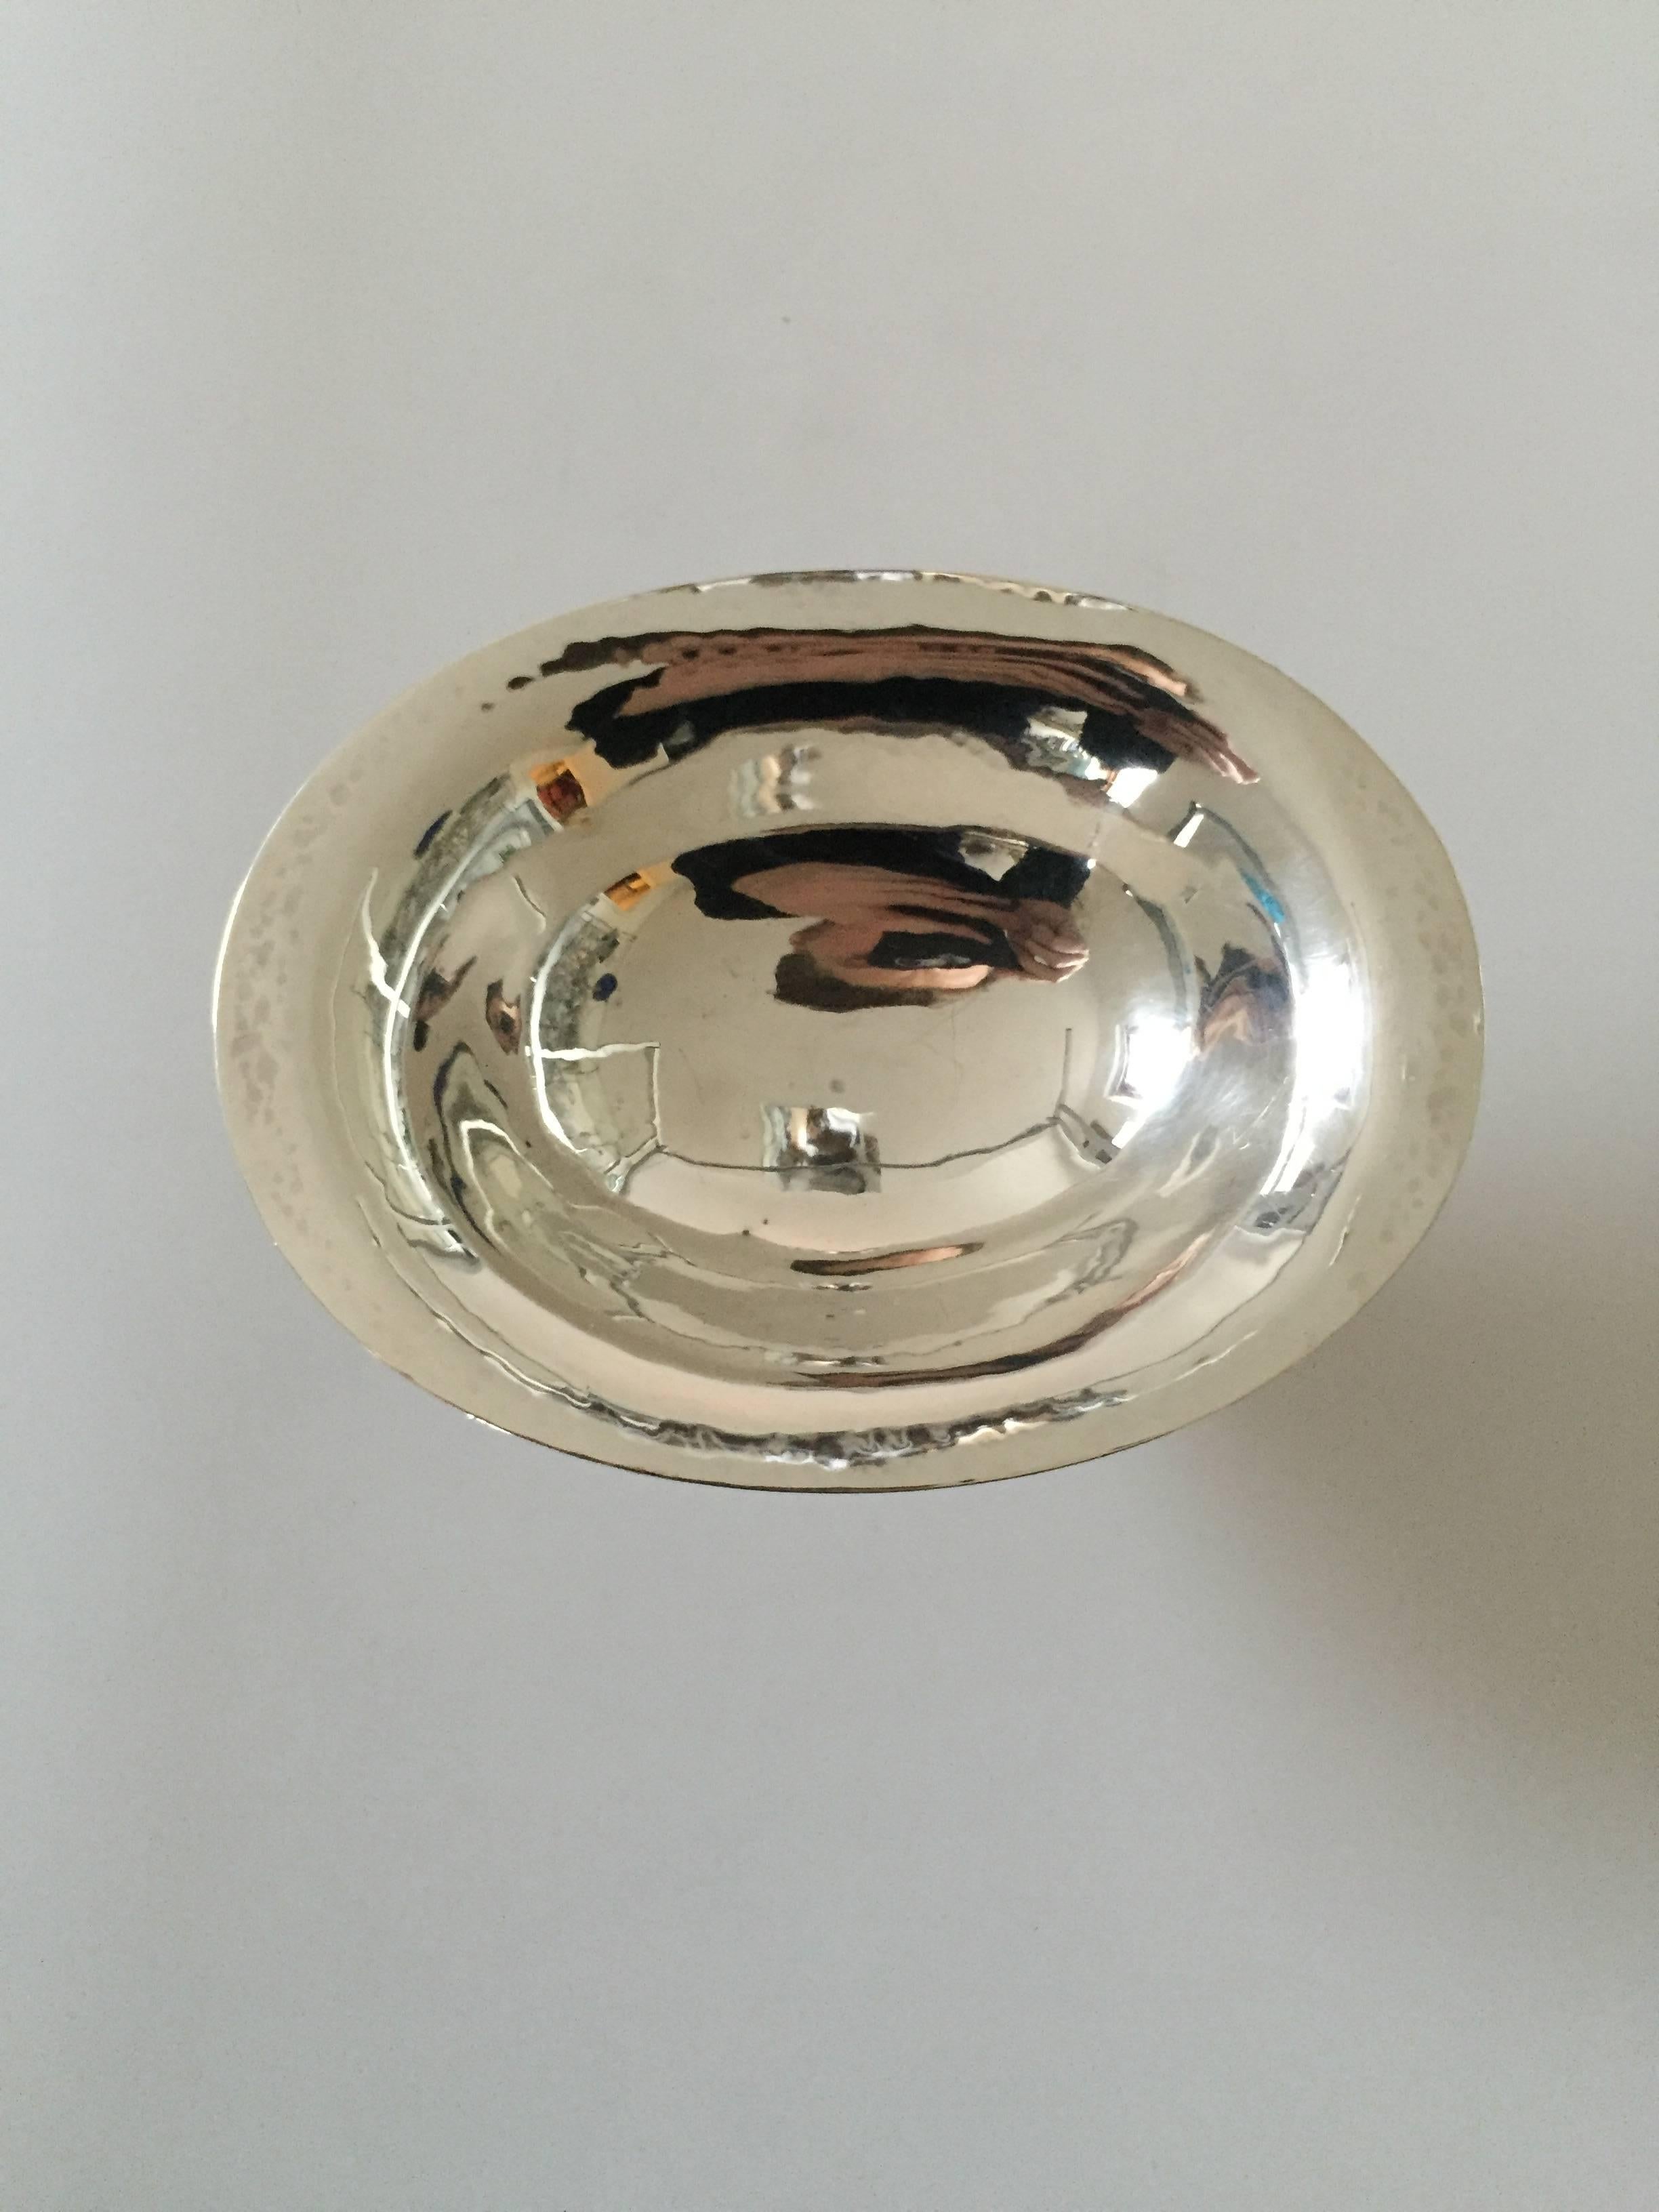 Georg Jensen sterling silver footed bowl #42. 

Measures 13.1 cm x 10 cm x 6 cm.

